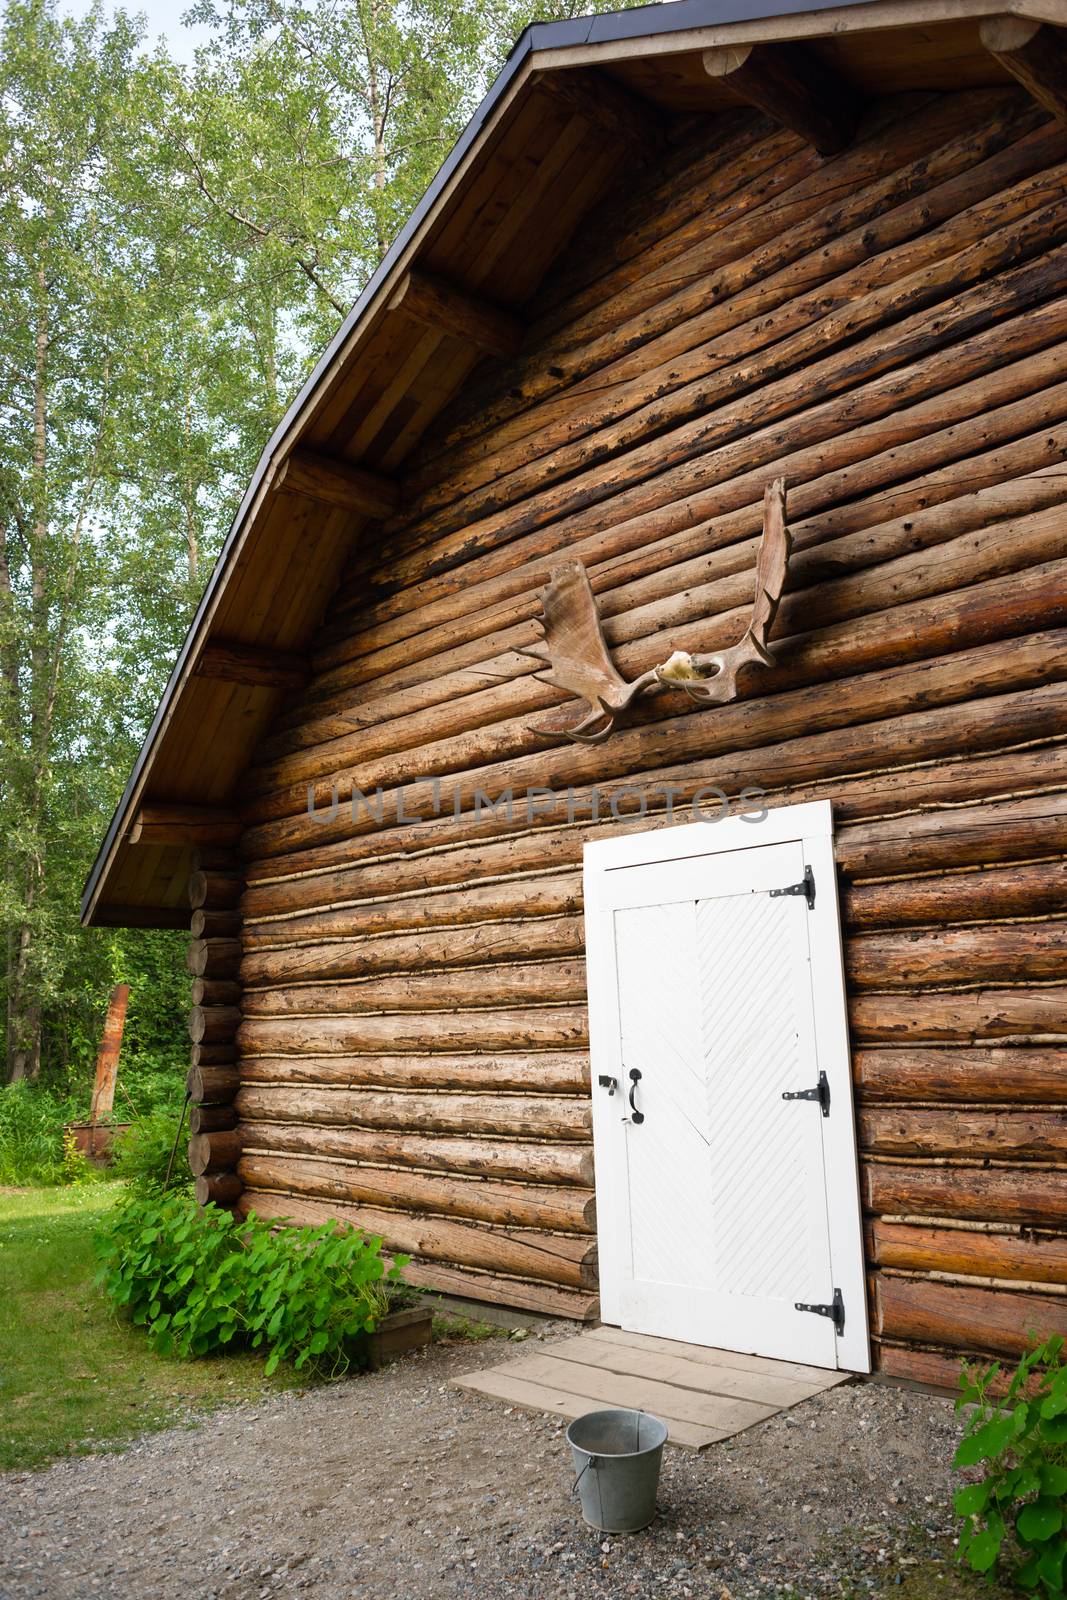 Rustic Log Out Building Moose Antler Rack Alaska Outback by ChrisBoswell